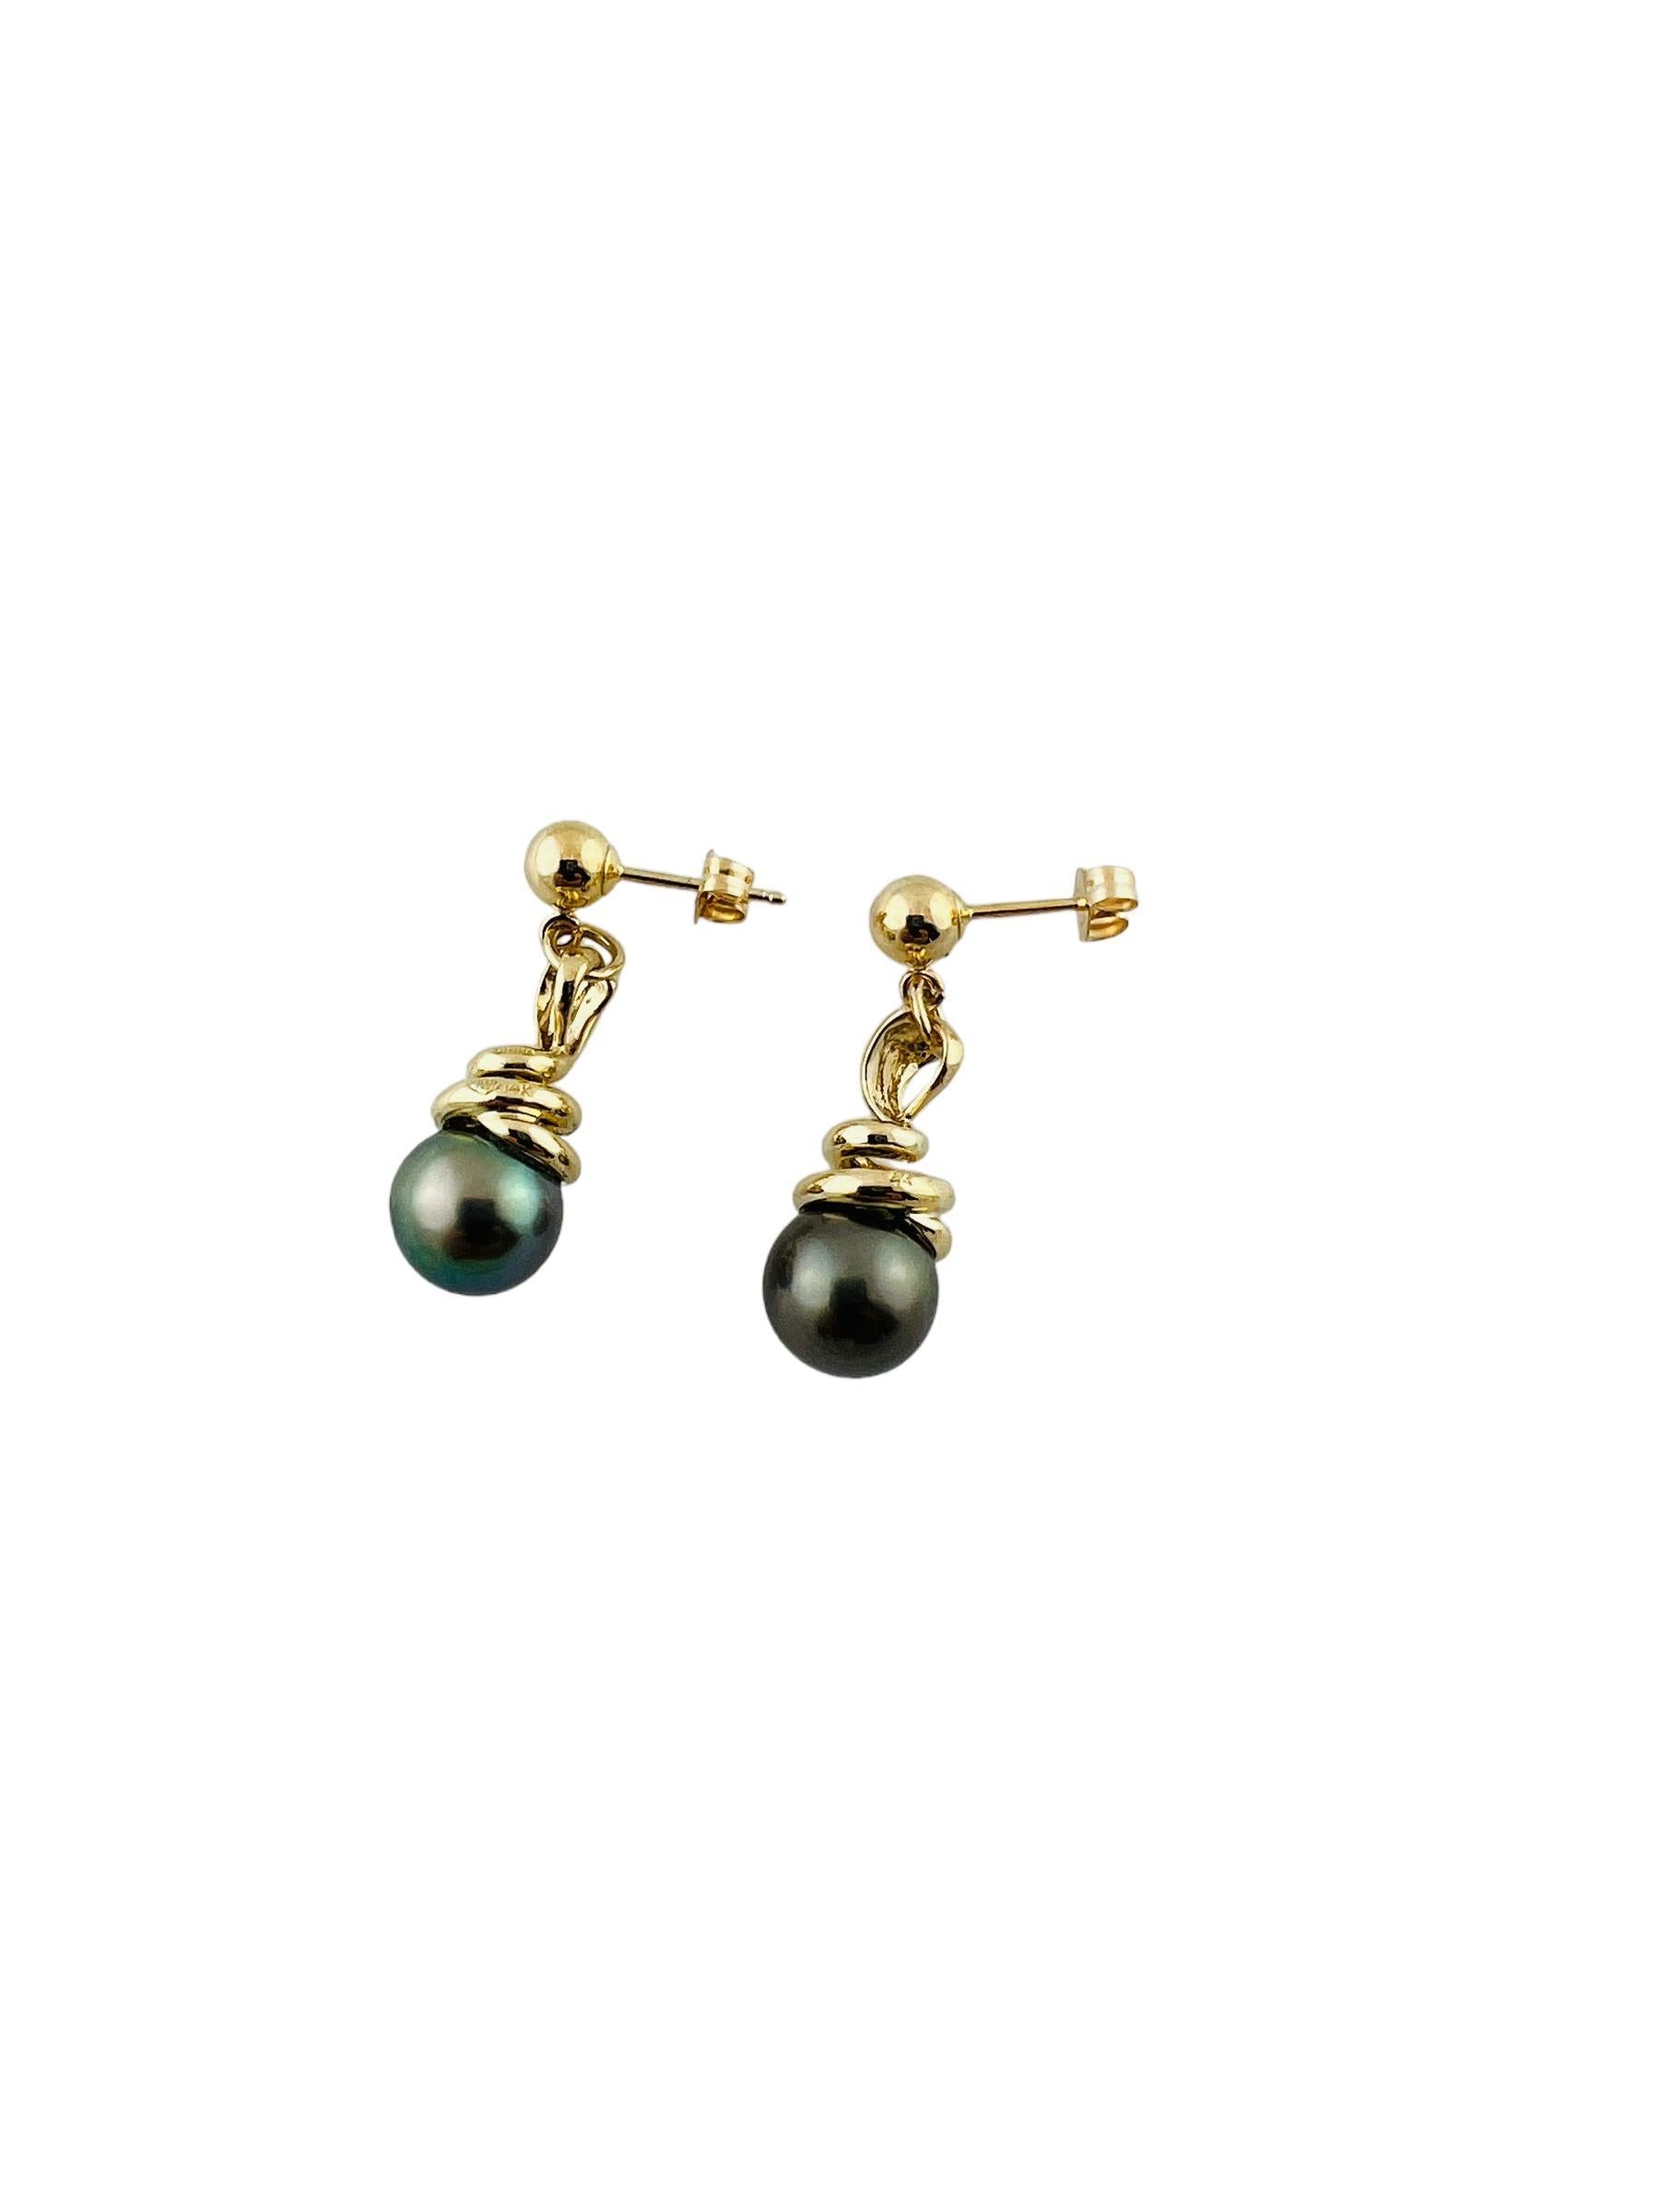 Vintage 14K Yellow Gold Black Pearl Dangle Earrings

Gorgeous set of 14K gold dangle earrings with 2 beautiful black pearls!

Pearls: 8.6mm each

Size: 28.0mm X 8.7mm X 8.7mm

Weight: 5.0 g/ 3.2 dwt

Hallmark: 14K

Very good condition,